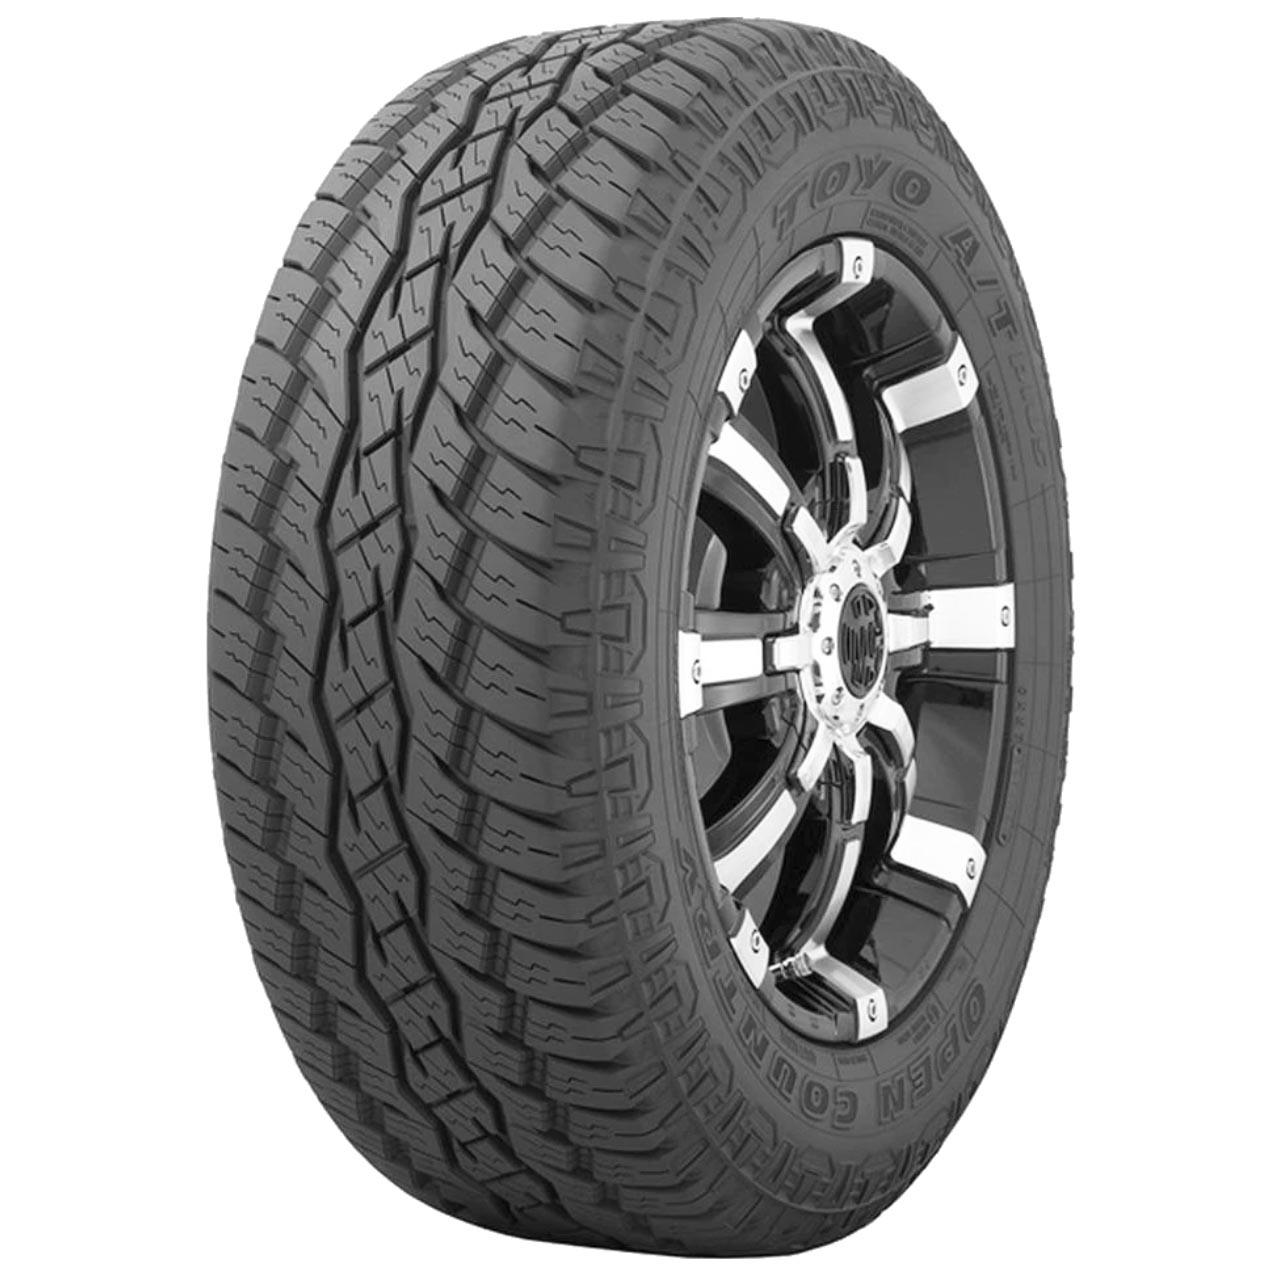 Toyo Open Country AT Plus 215/80R15 102T